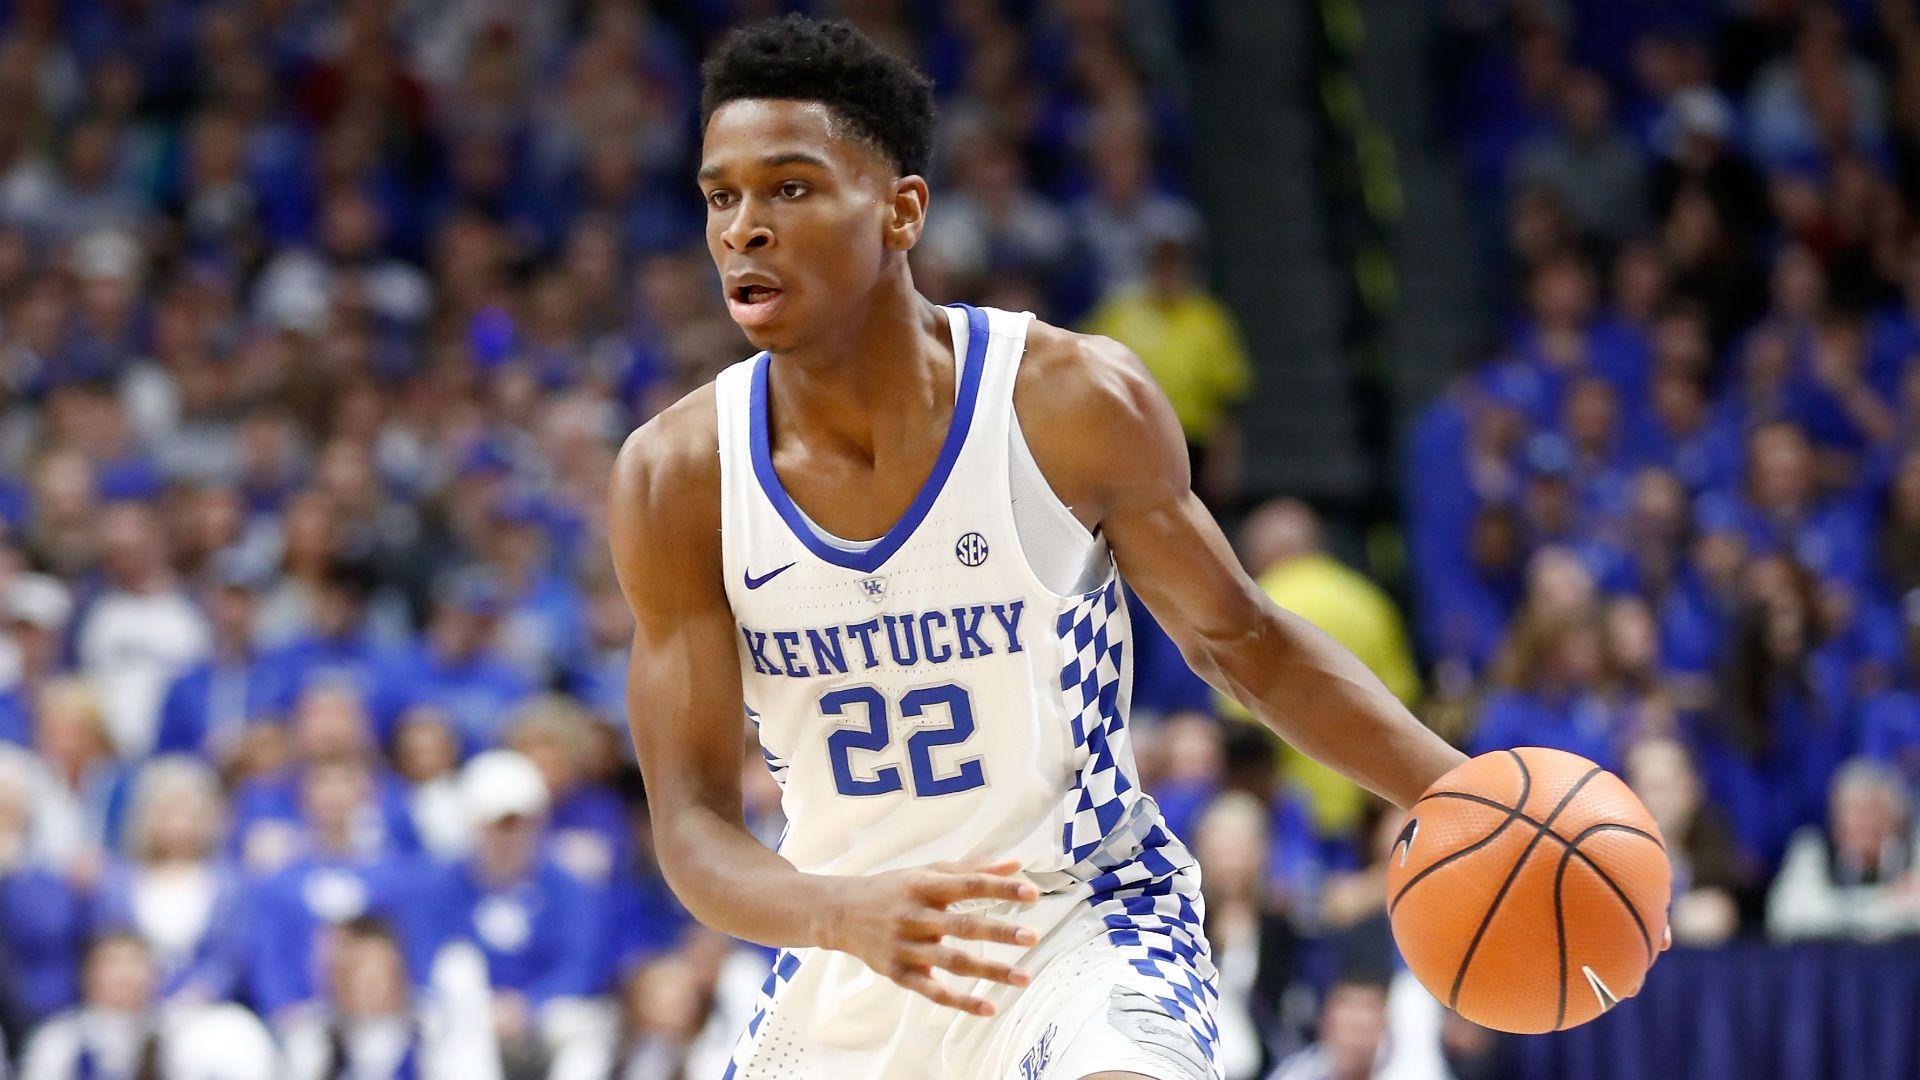 NBA Draft 2018: Shai Gilgeous Alexander Could Jump Into Early